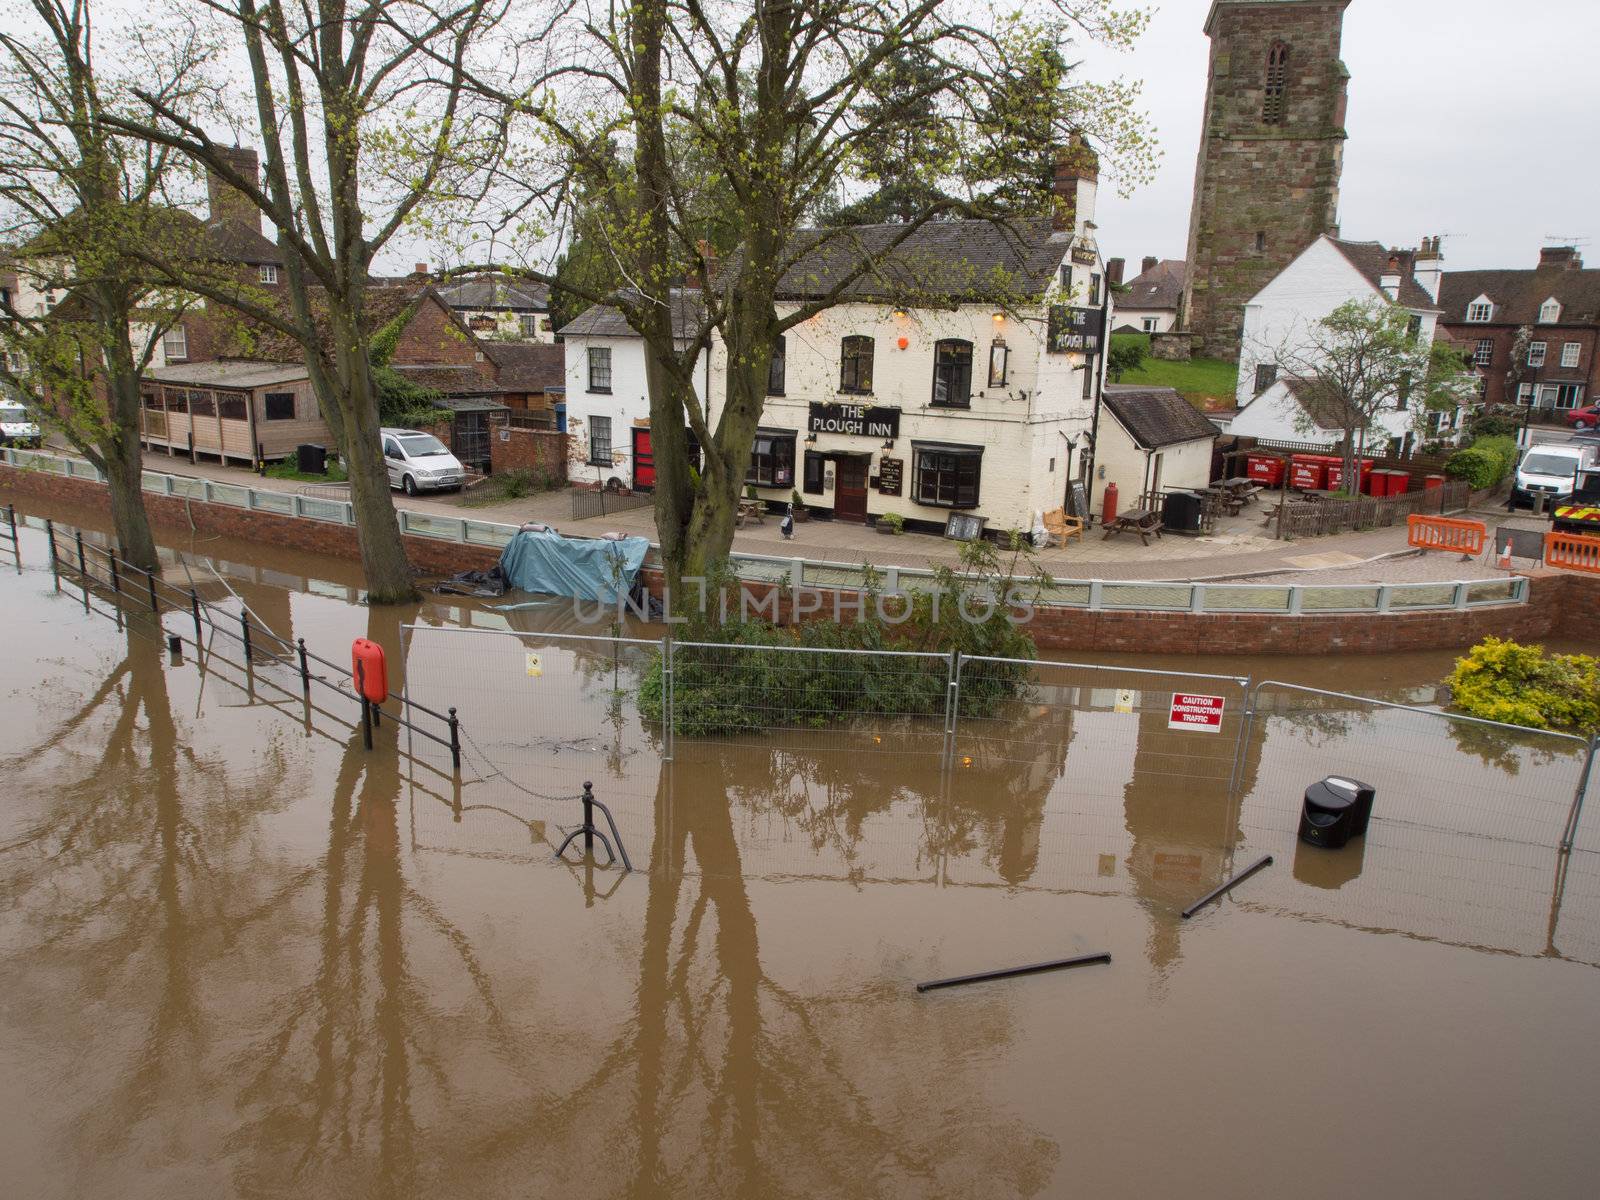 Pub saved by newly completed flood defenses by ianthwaites